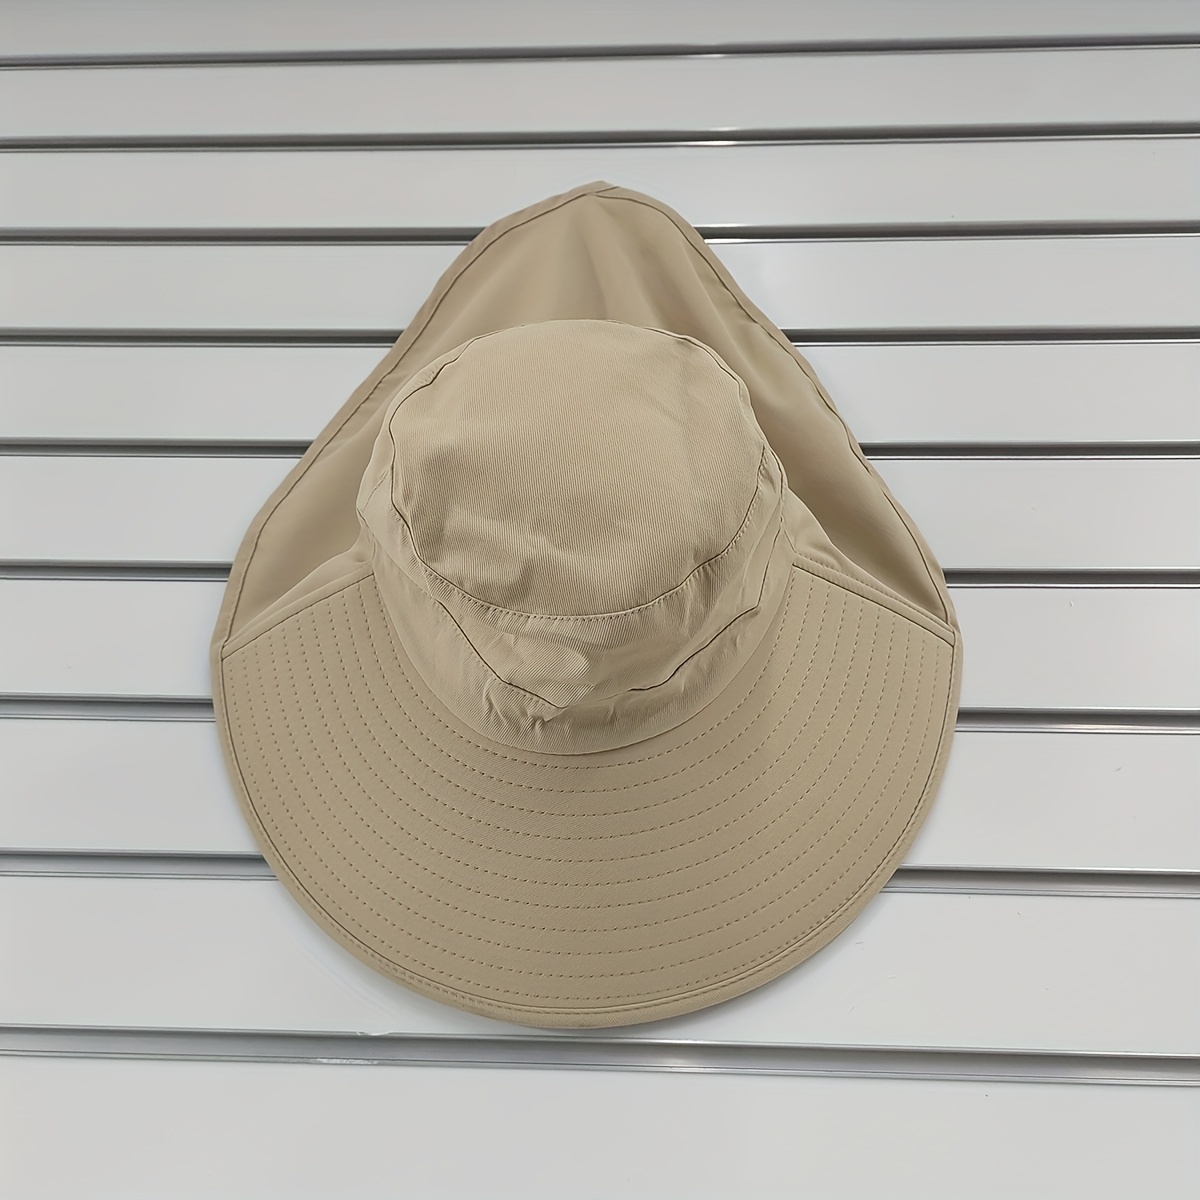 Uv Protection Fishing Hat With Neck Brace And Large Brim Ideal For